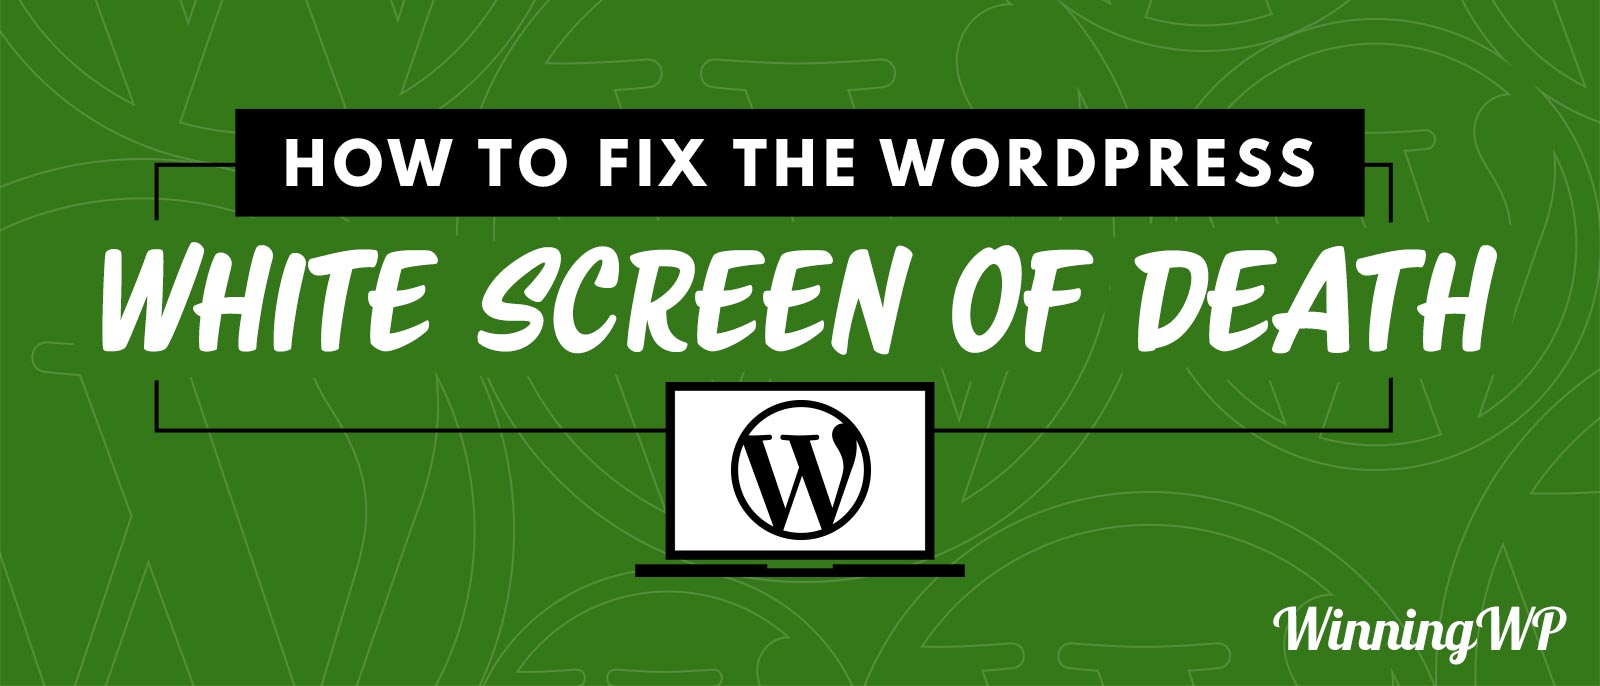 how-to-fix-the-wordpress-whitescreen-of-death